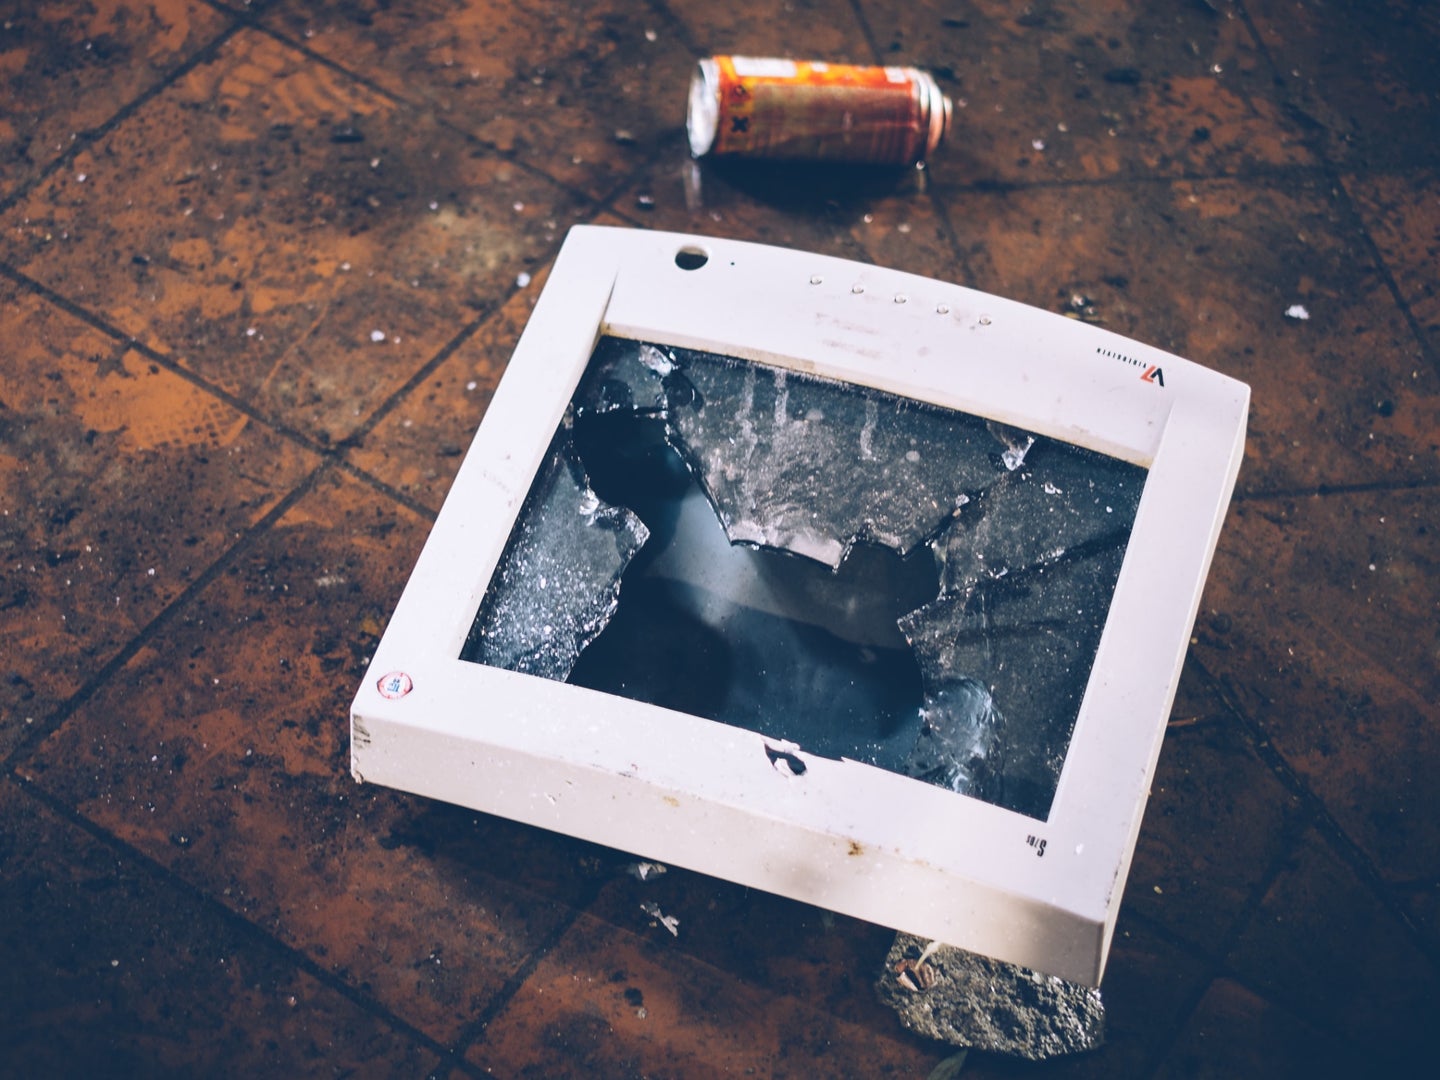 A smashed computer monitor on a floor near a discarded can—physical destruction is one way to permanently delete files.